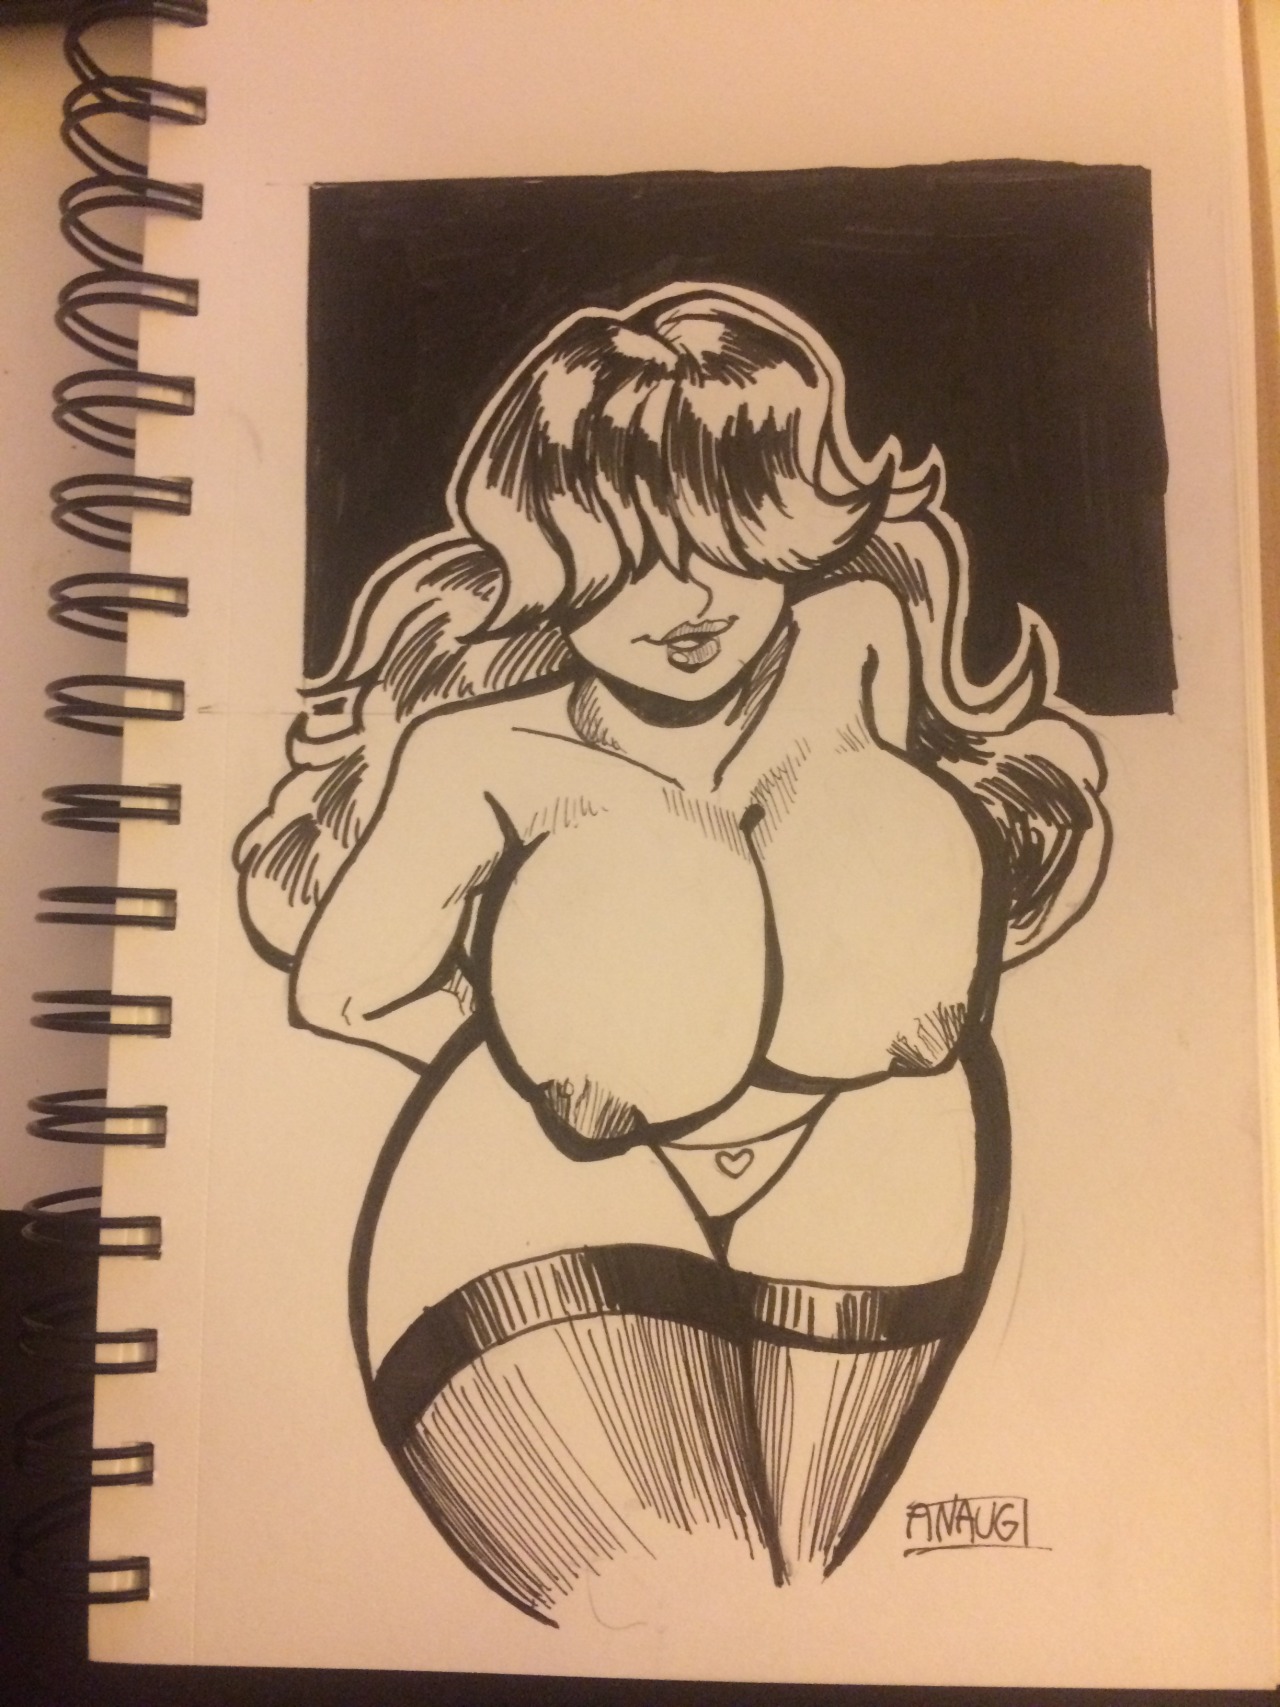 captainanaugi:  Went out, bought some pens and started a sketch book. This feels